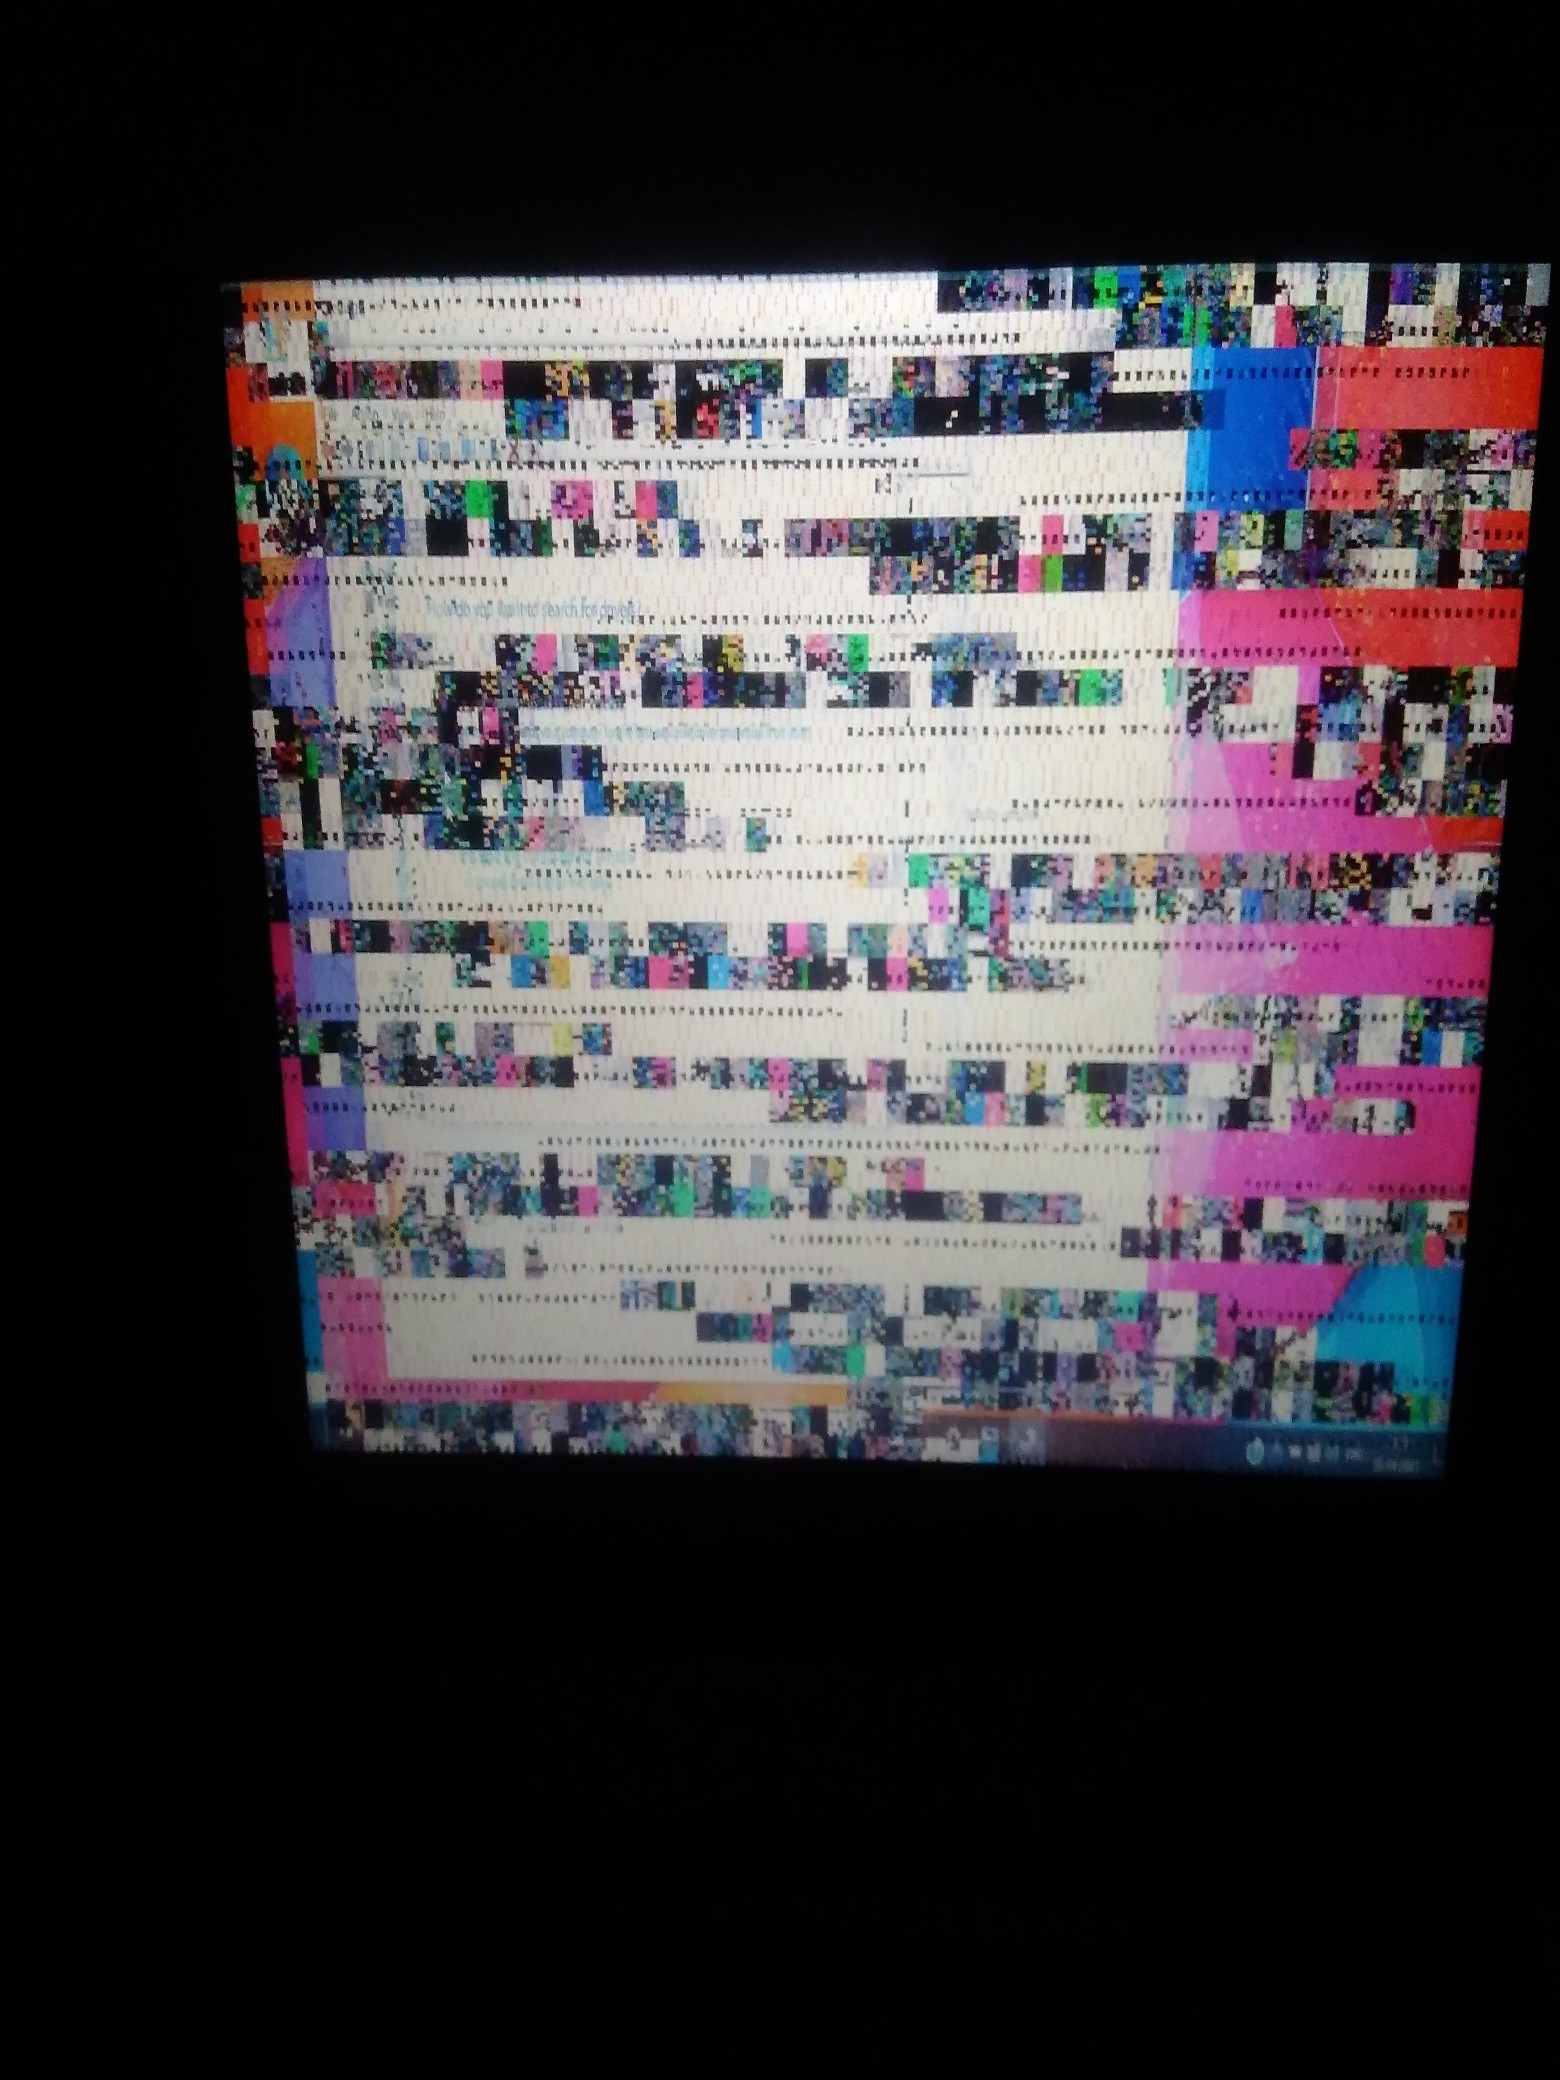 My laptop's screen glitches and freezes randomly - HP Support